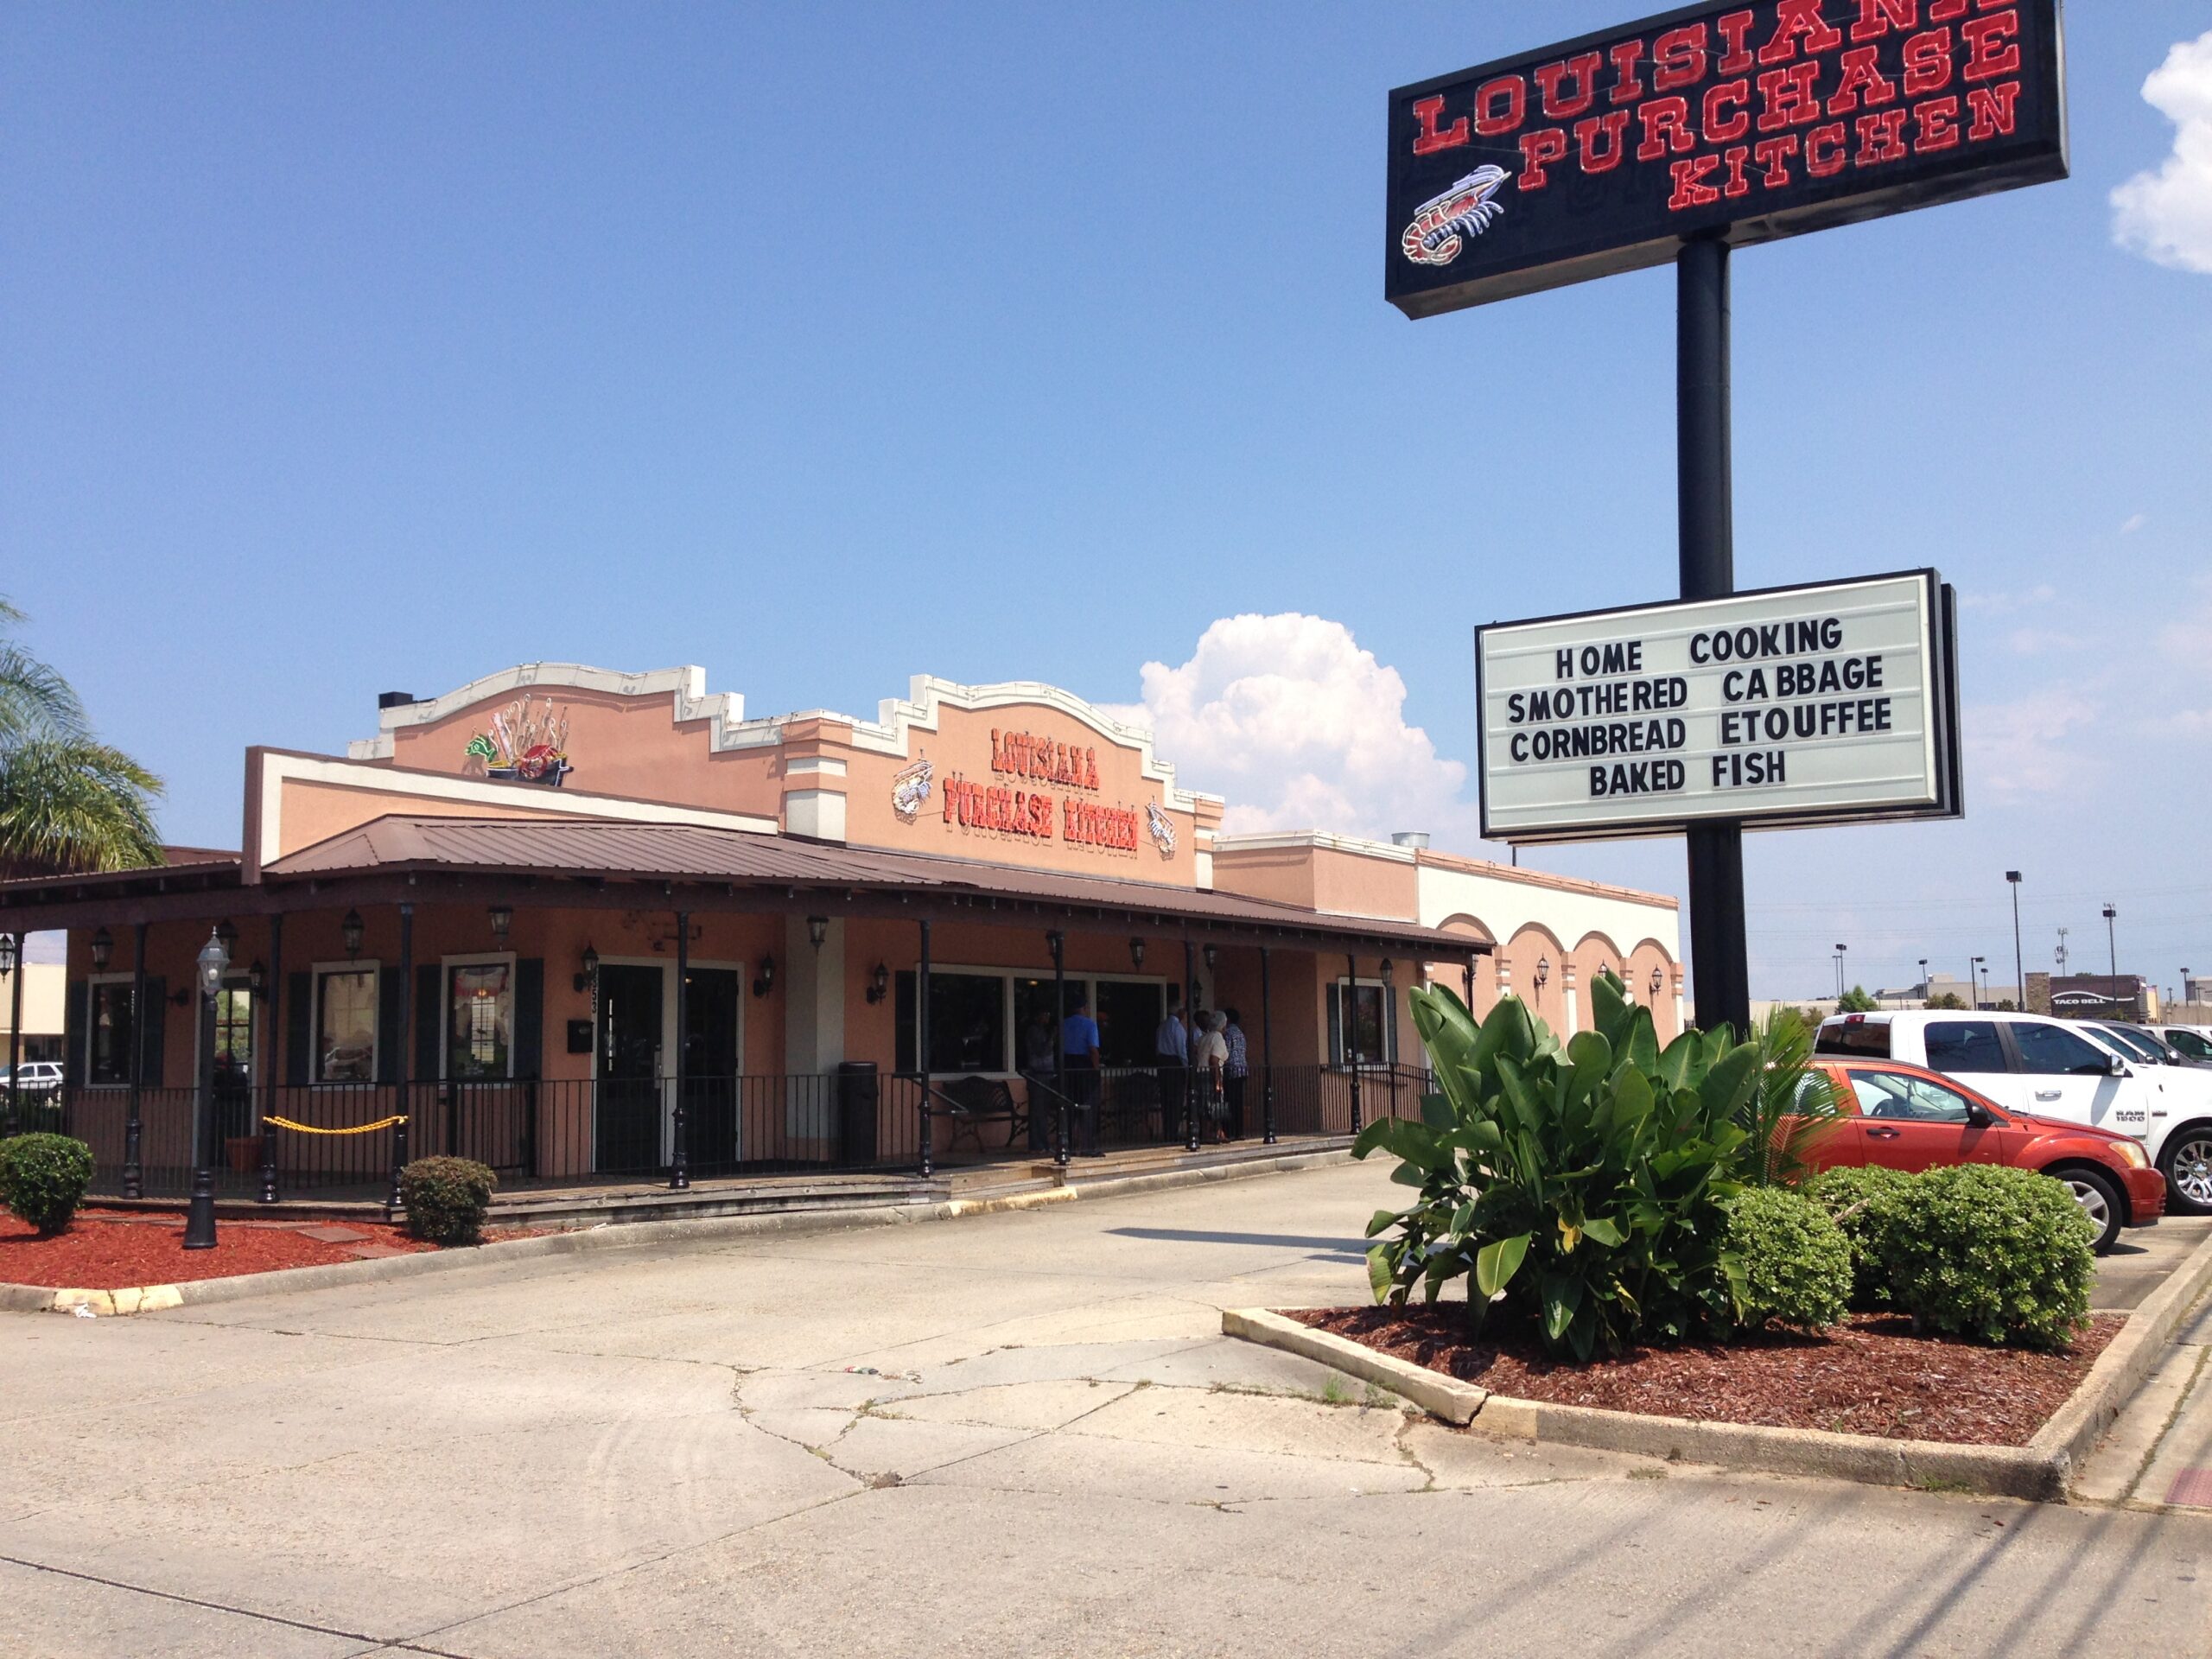 A Metairie buffet restaurant, Louisiana Purchase Kitchen, viewed from the outside.